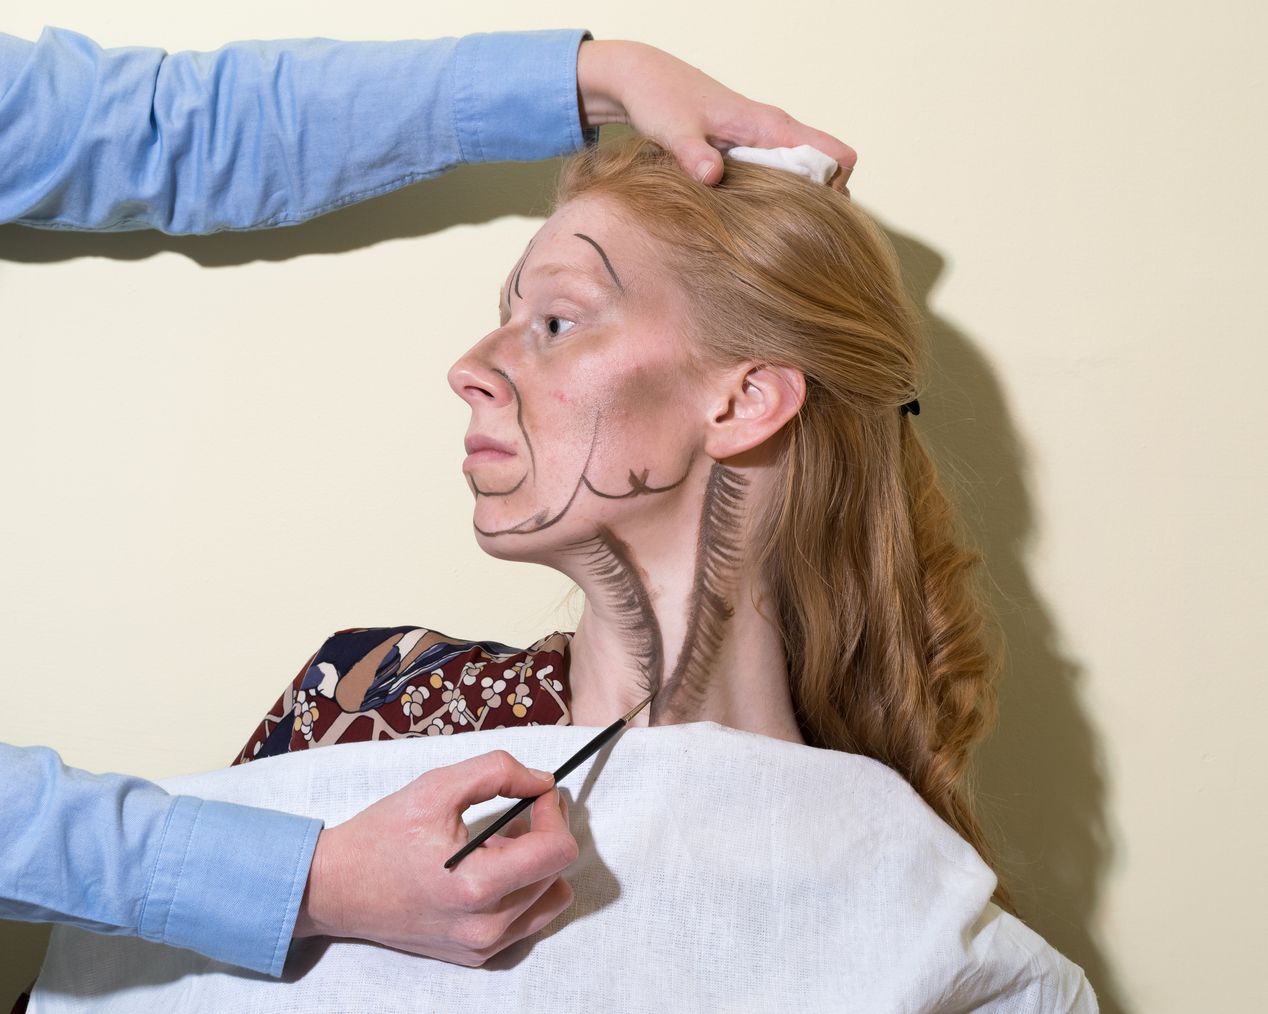 Makeup artist is painting smaller lines on the model's neck, art photography, Ilona Szwarc, contemporary Los Angeles artist.